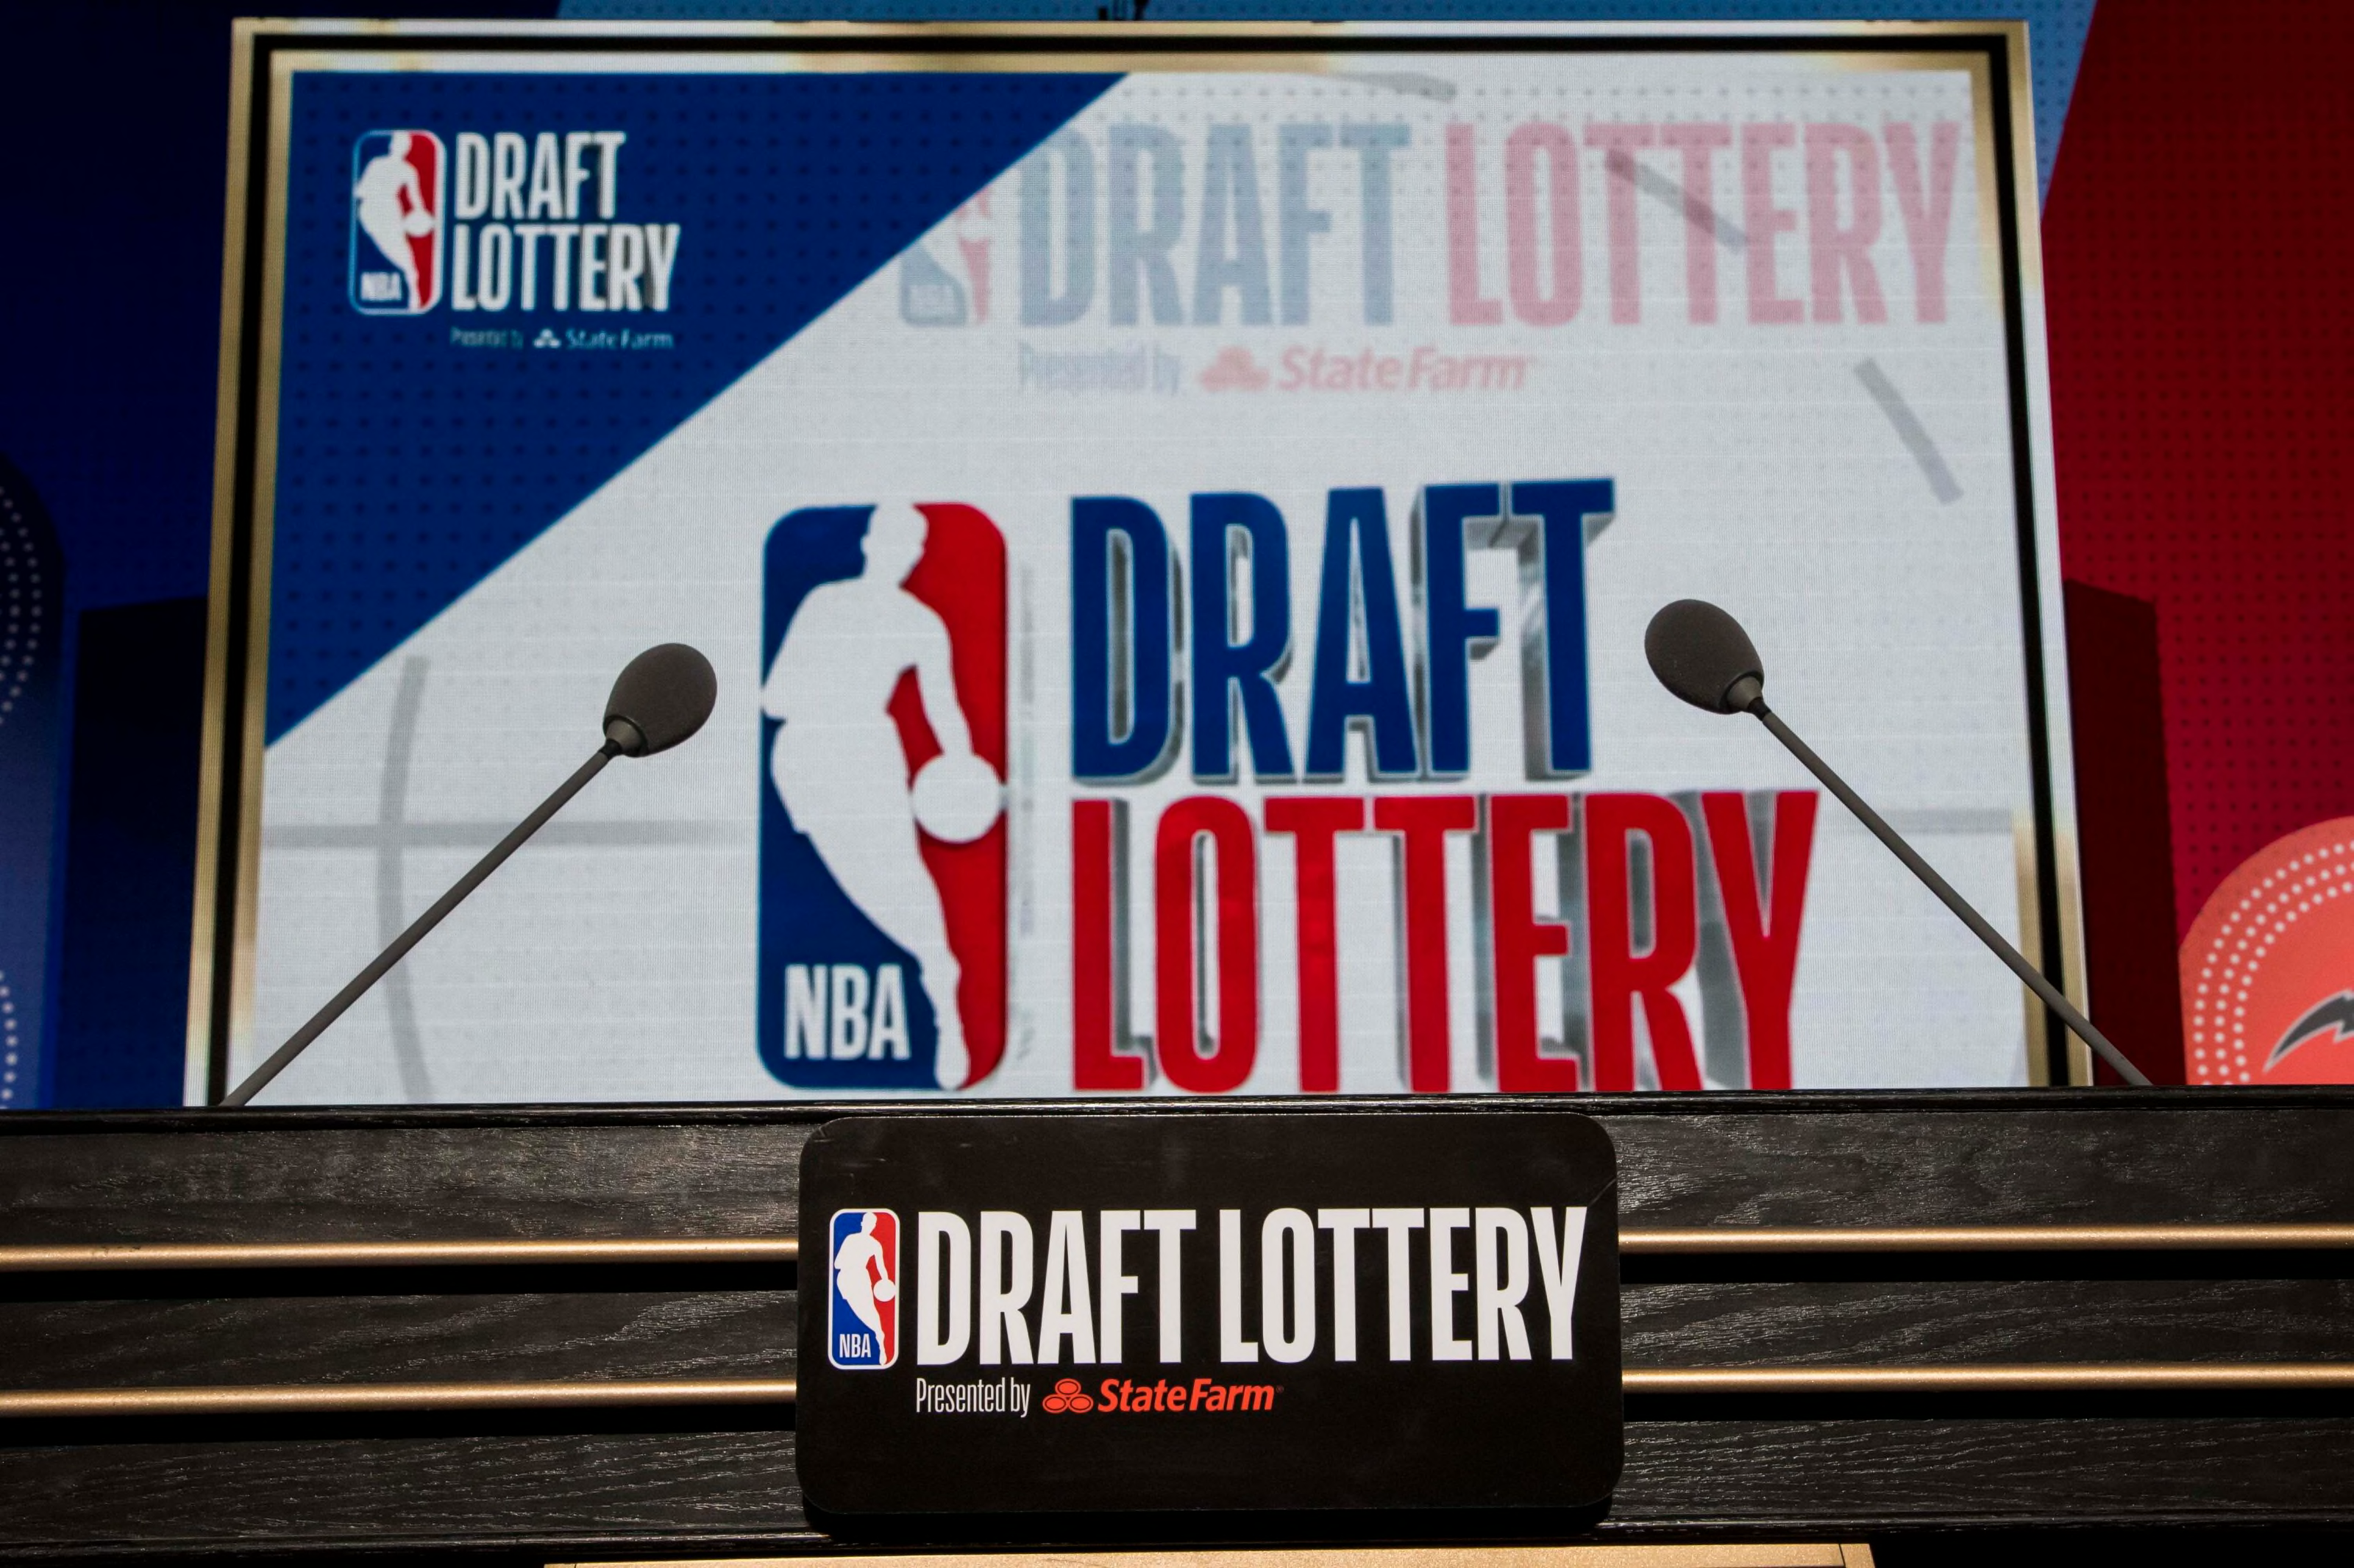 Reviewing the Trail Blazers options before the 2022 NBA Draft lottery